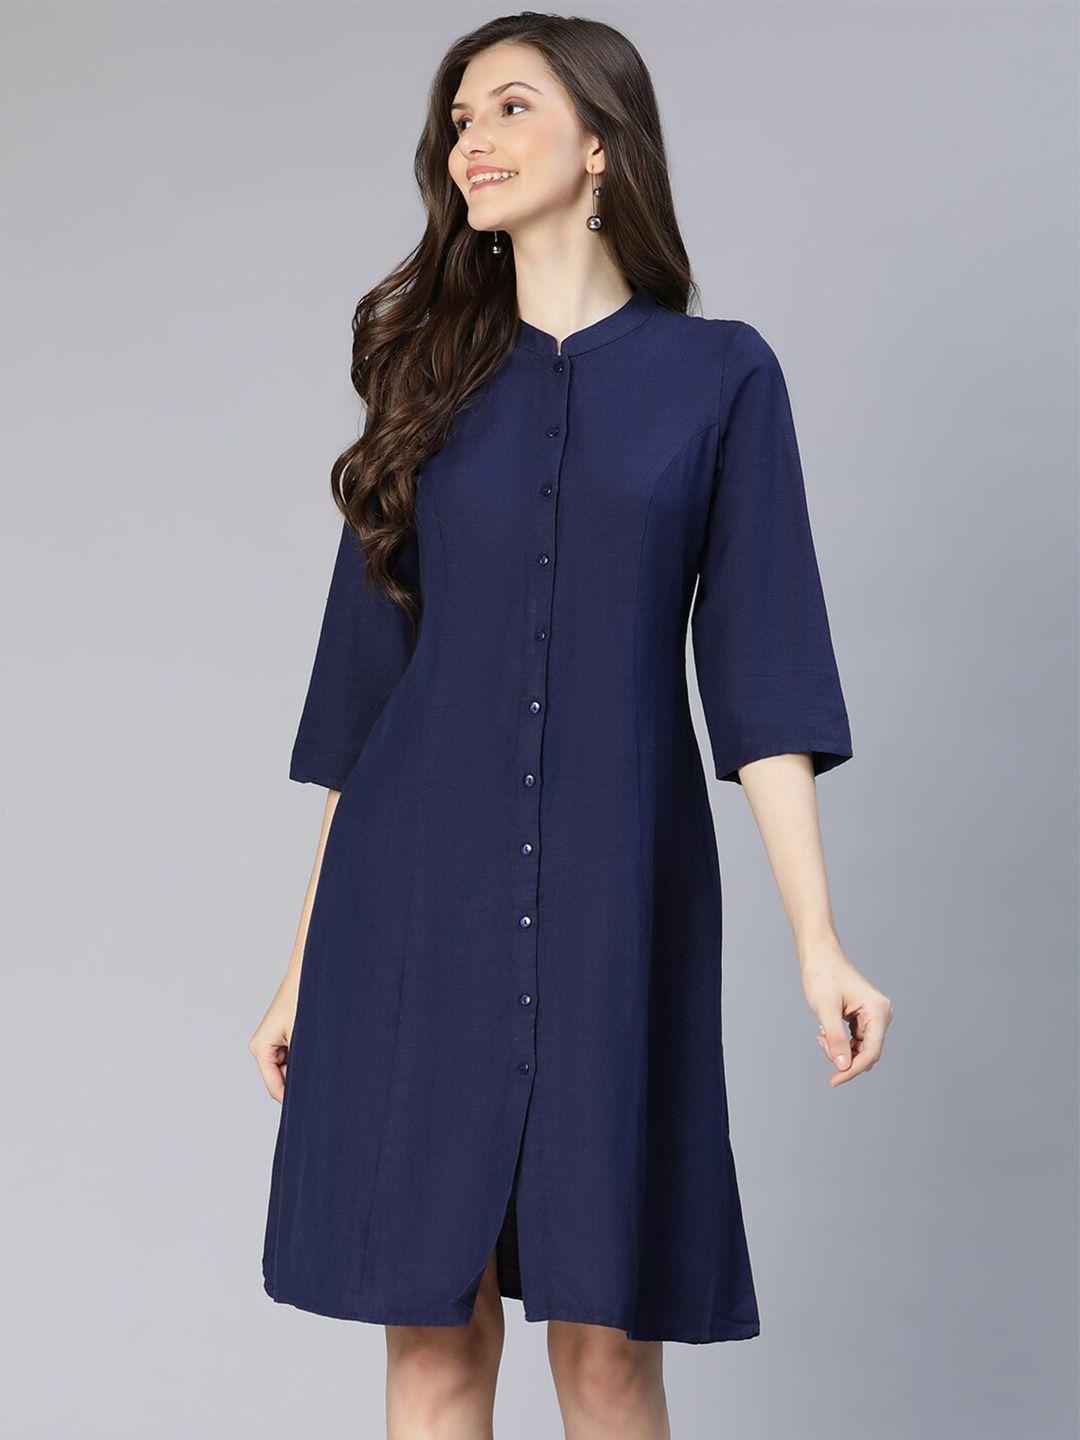 oxolloxo navy blue solid button-down shirt dress